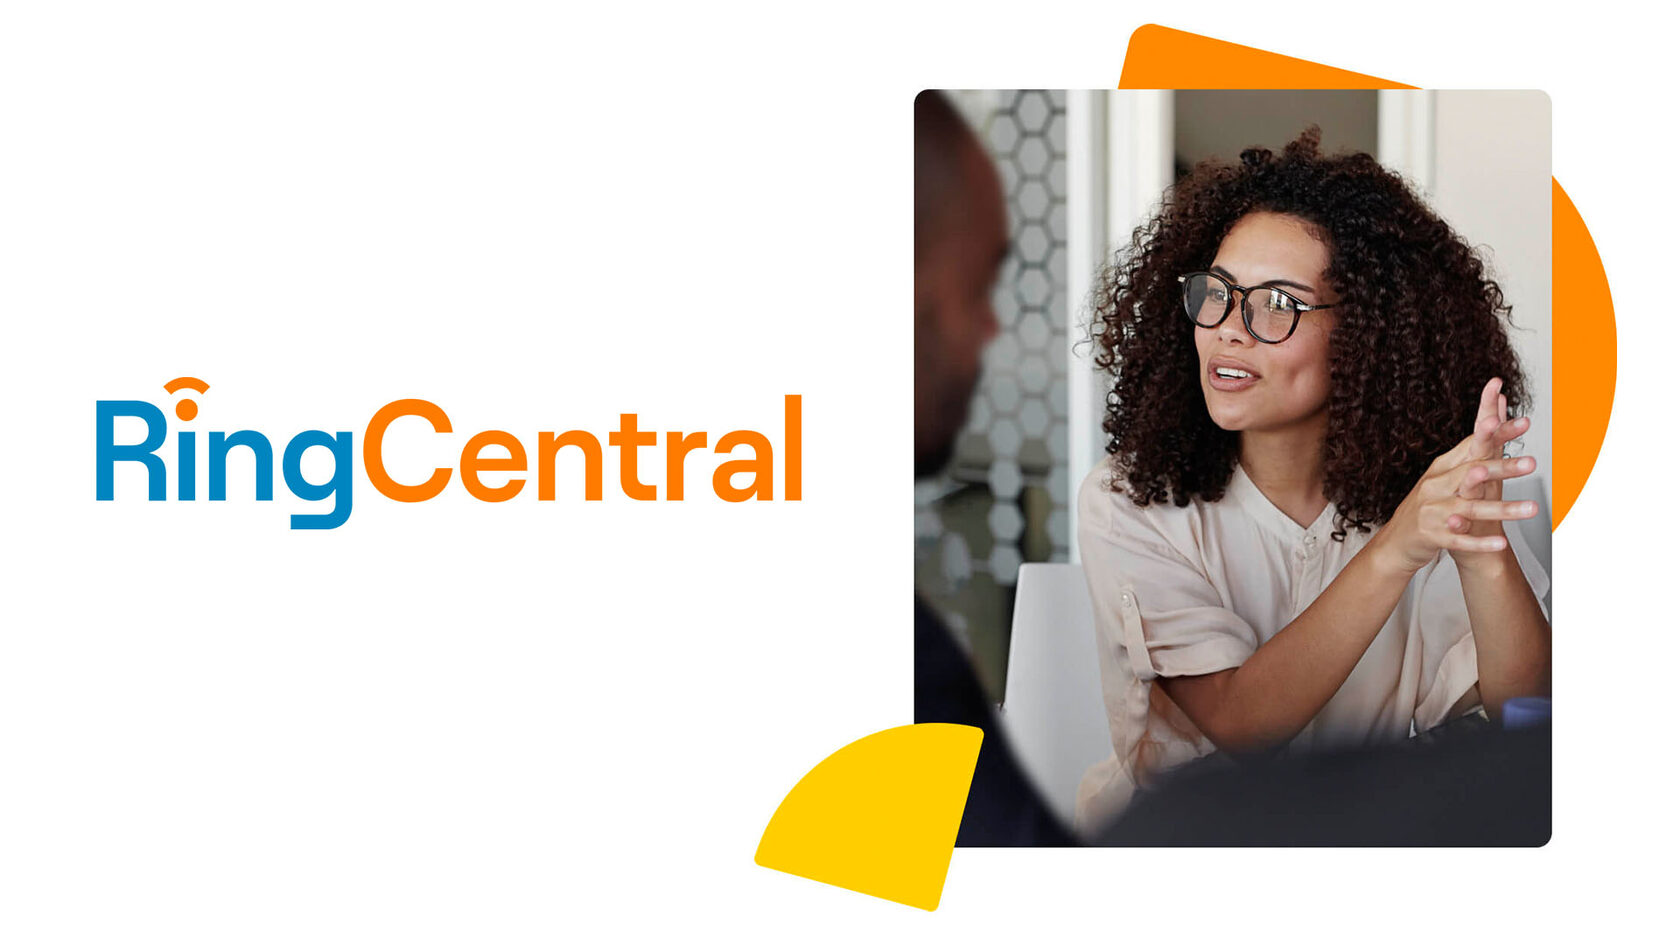 Pridis is now an official ISV of RingCentral